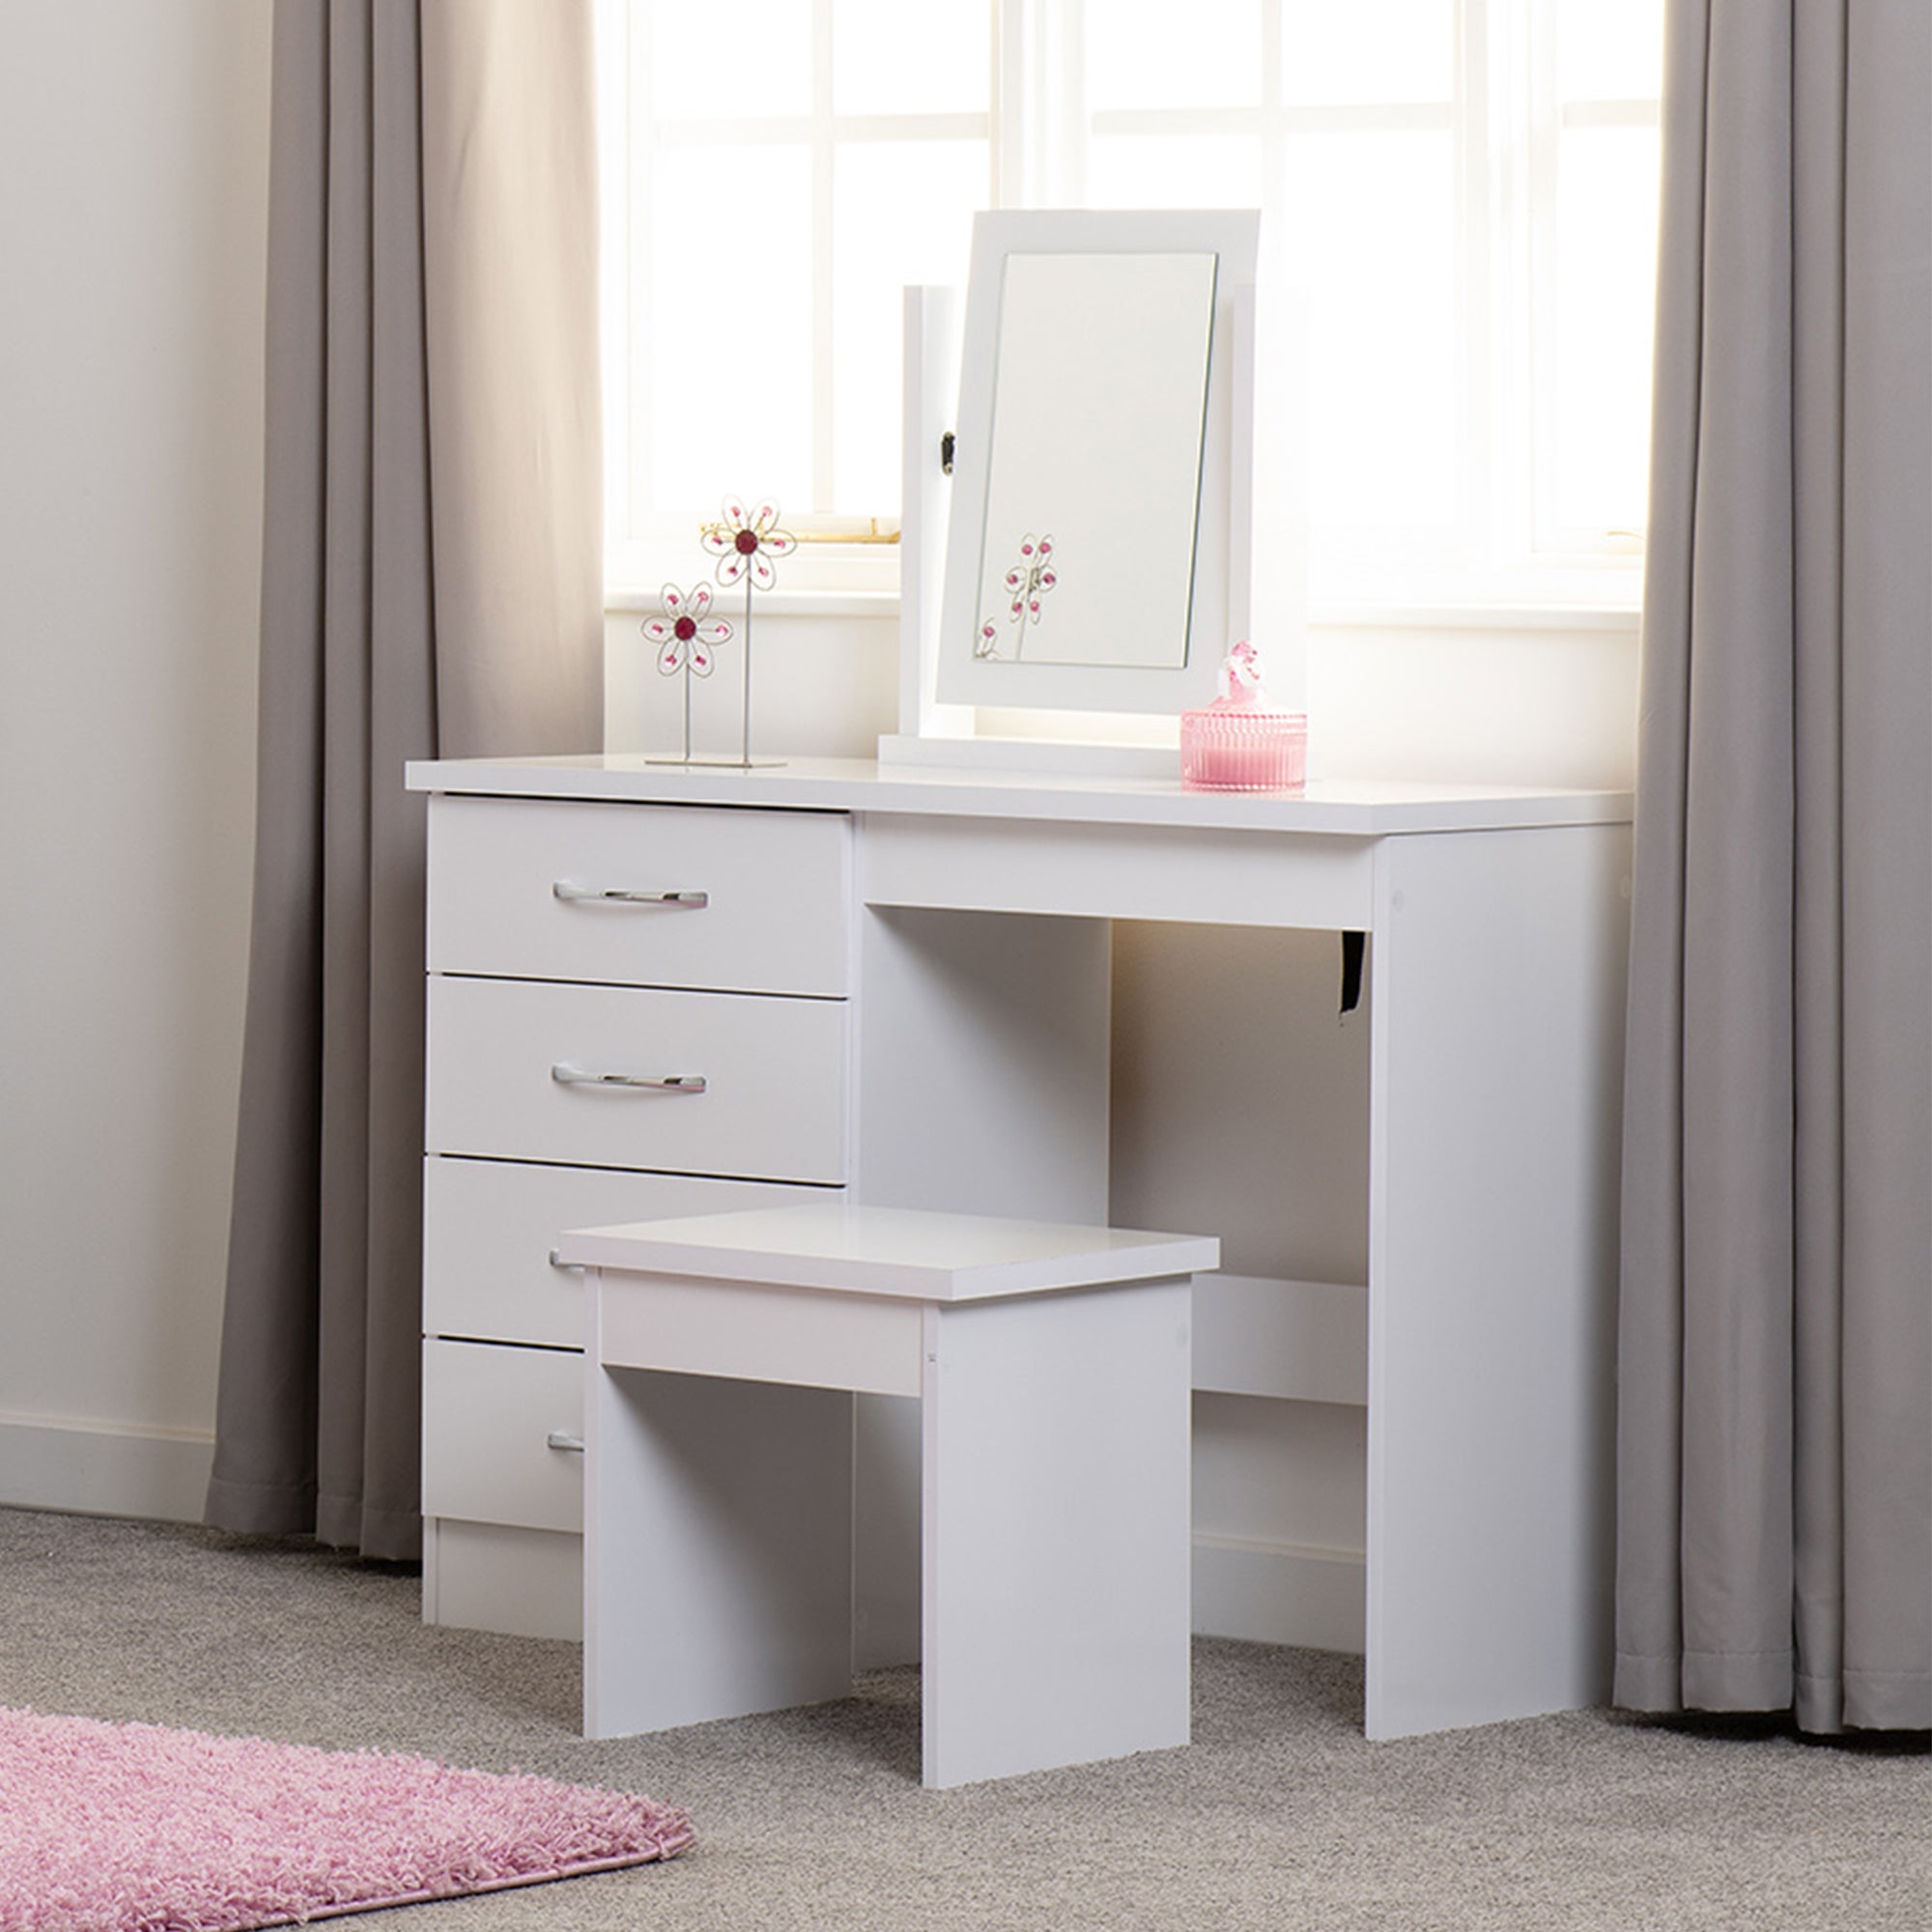 Nevada 4 Drawer Dressing Table Set with Mirror White